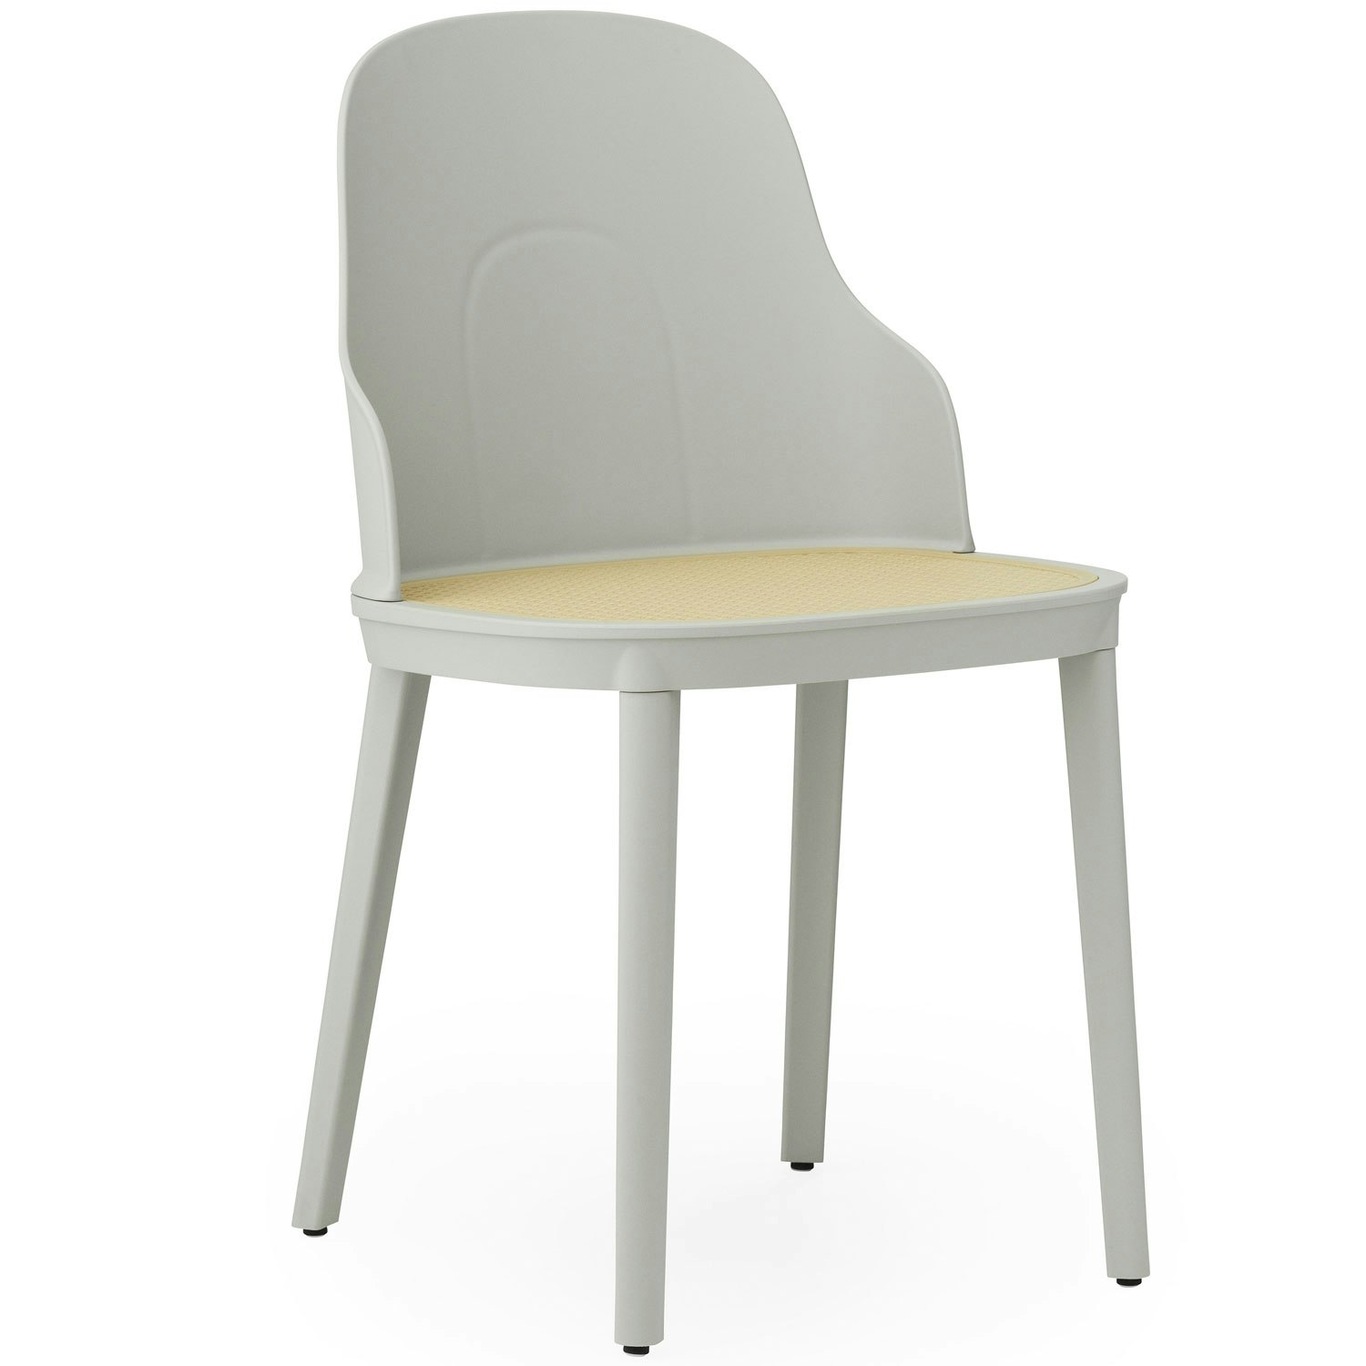 Allez Chair With Moulded Weave, Warm Grey